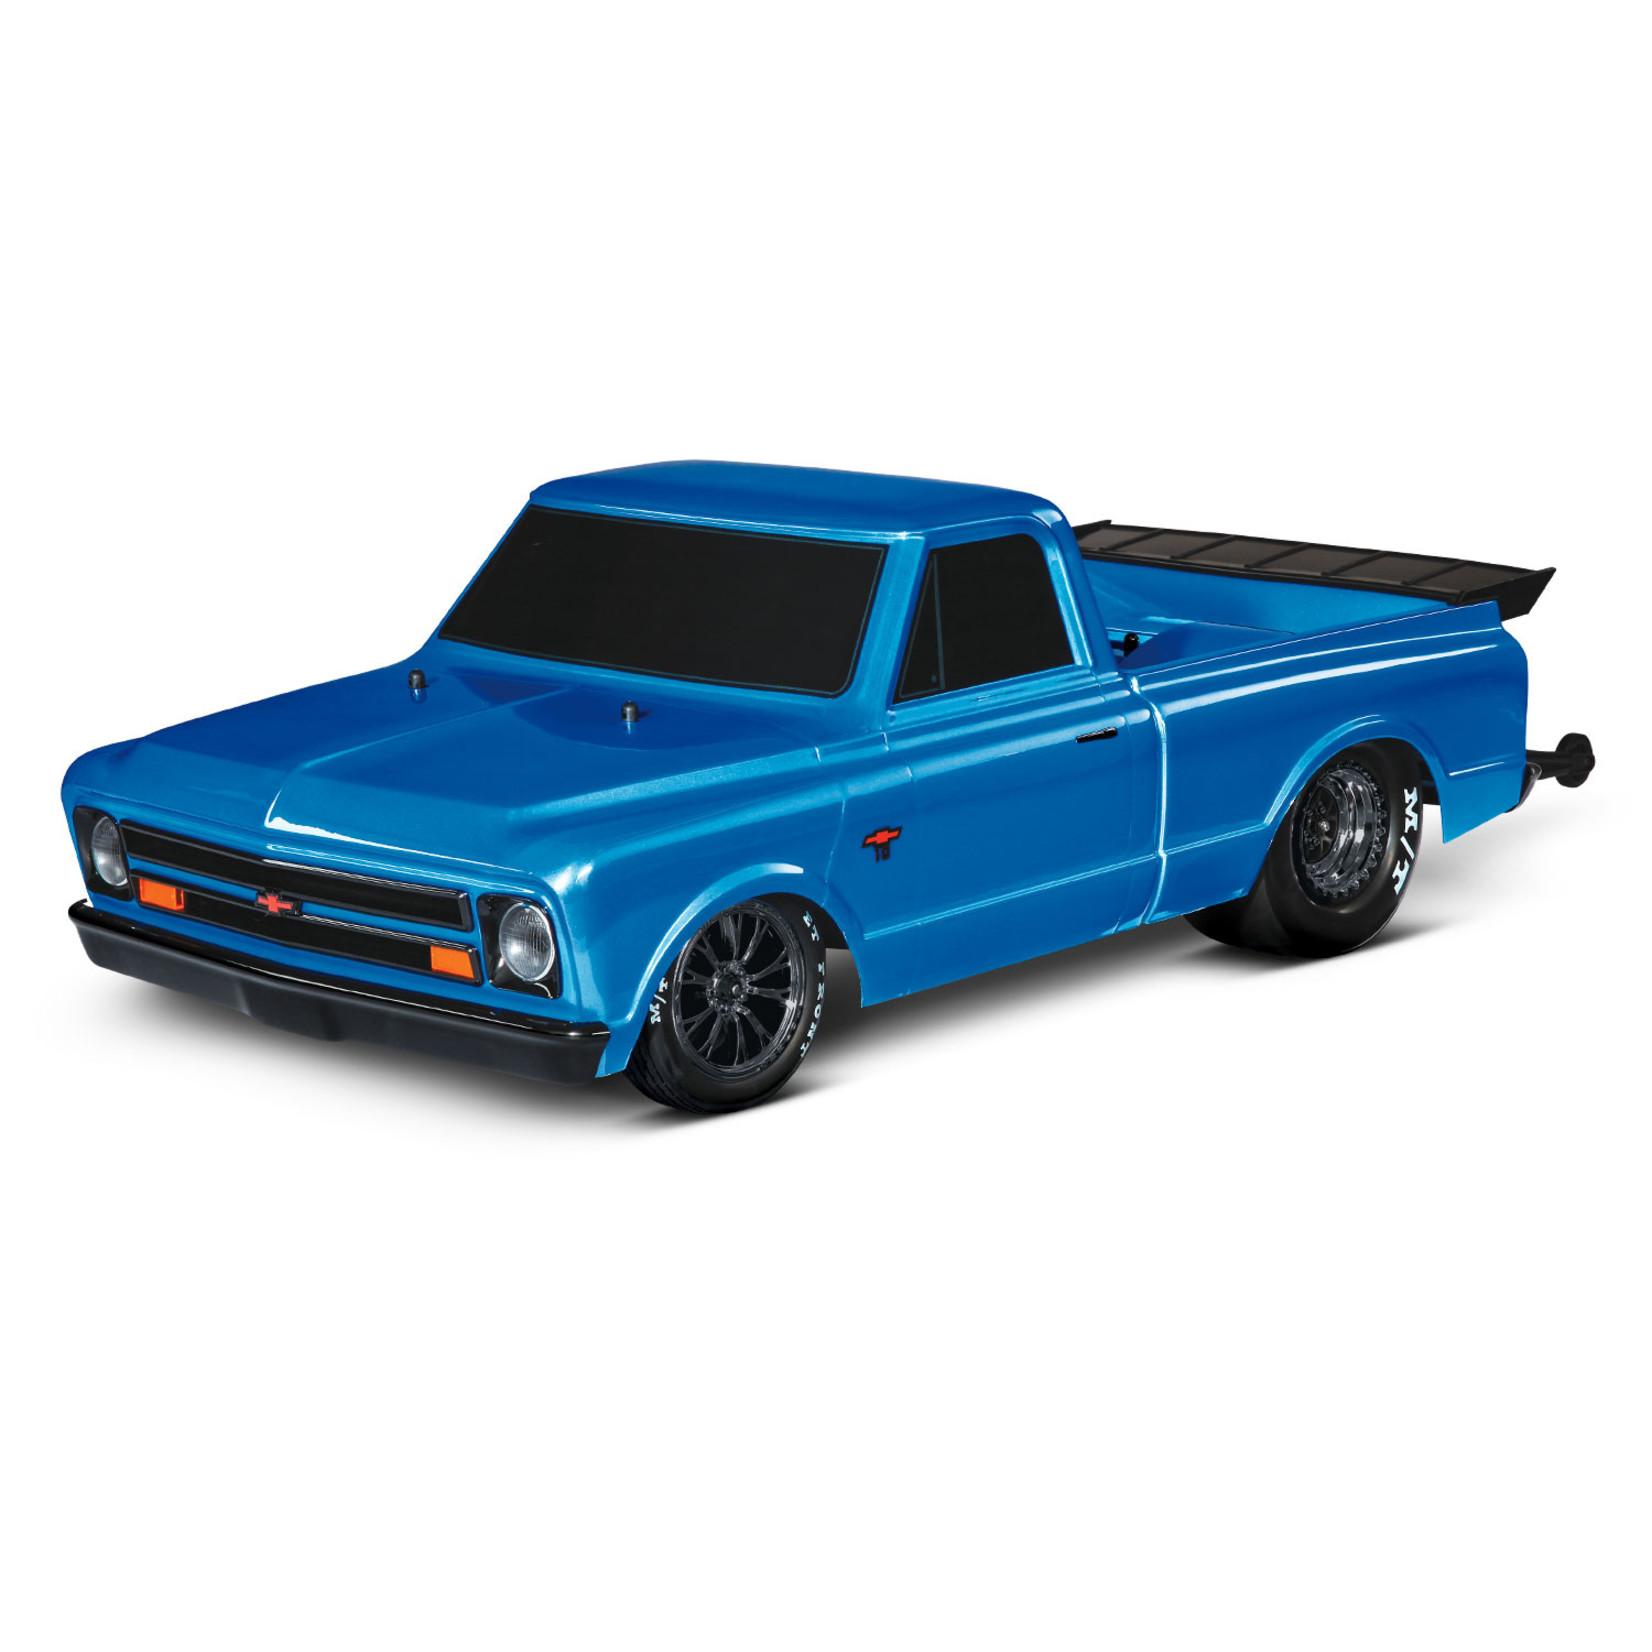 1/10 Scale Rc Drag Cars: 1/10 Scale RC Drag Cars Are Designed for Performance.